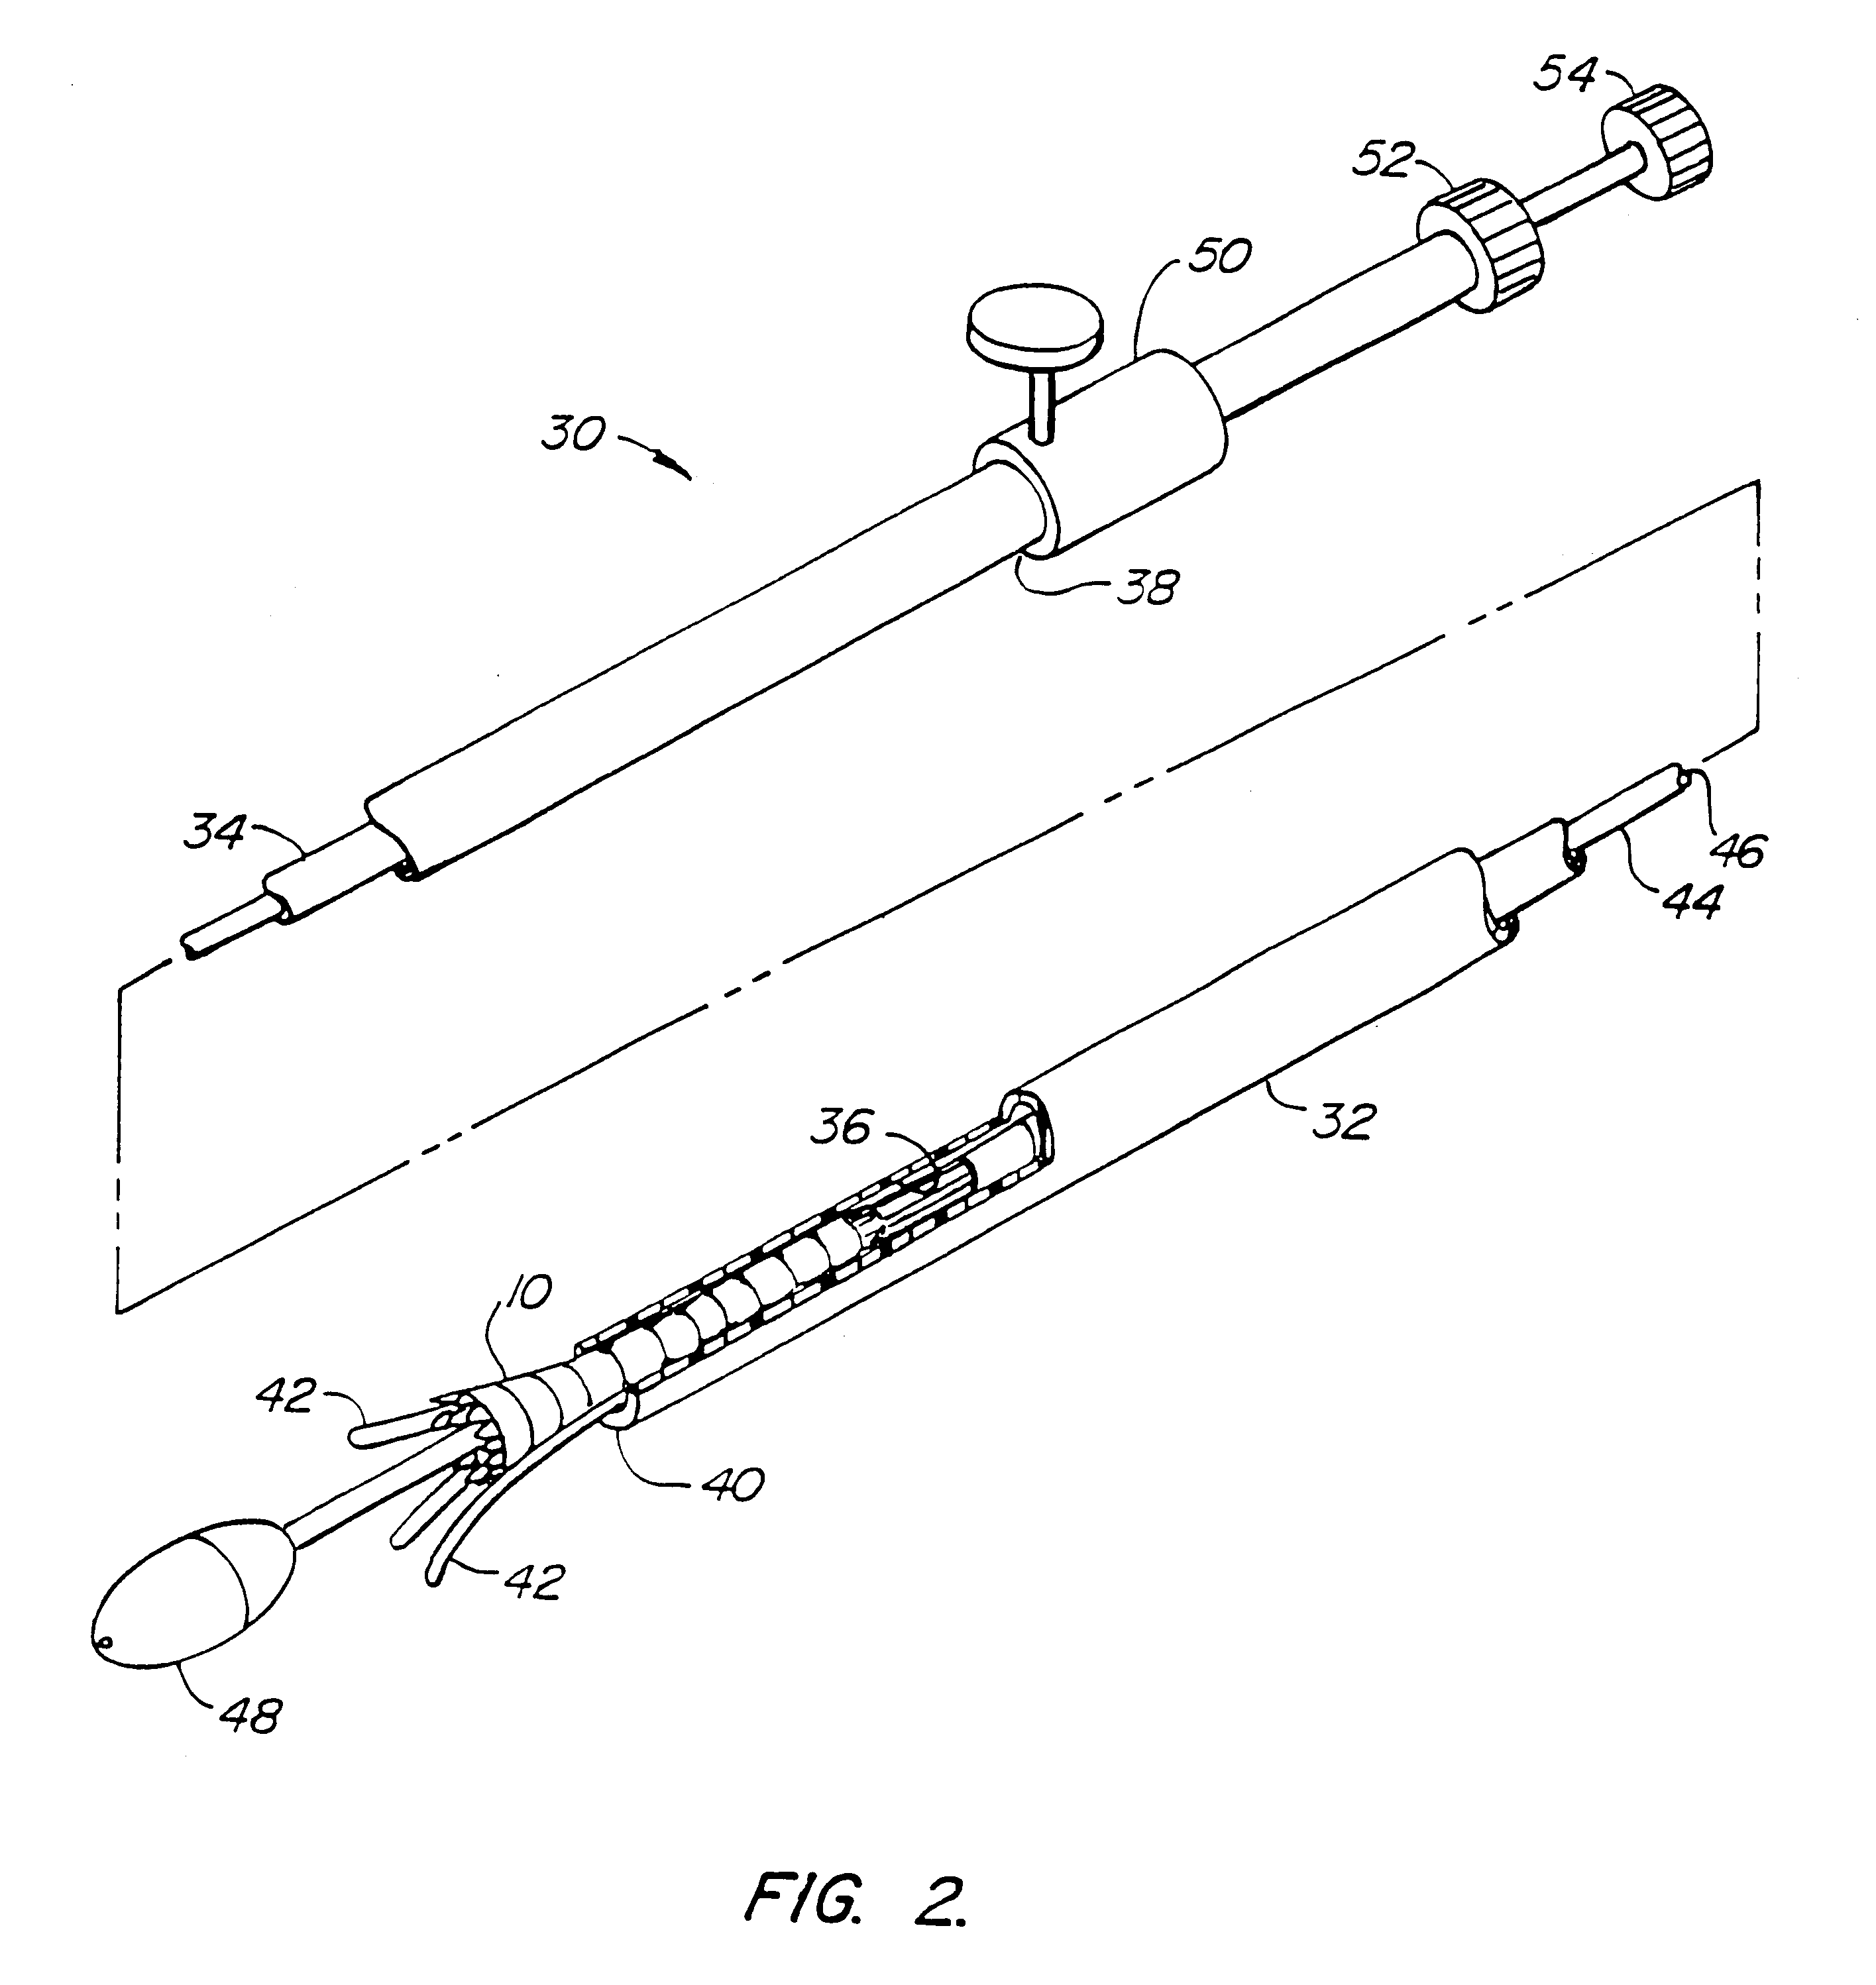 Endoluminal prostheses and therapies for highly variable body lumens